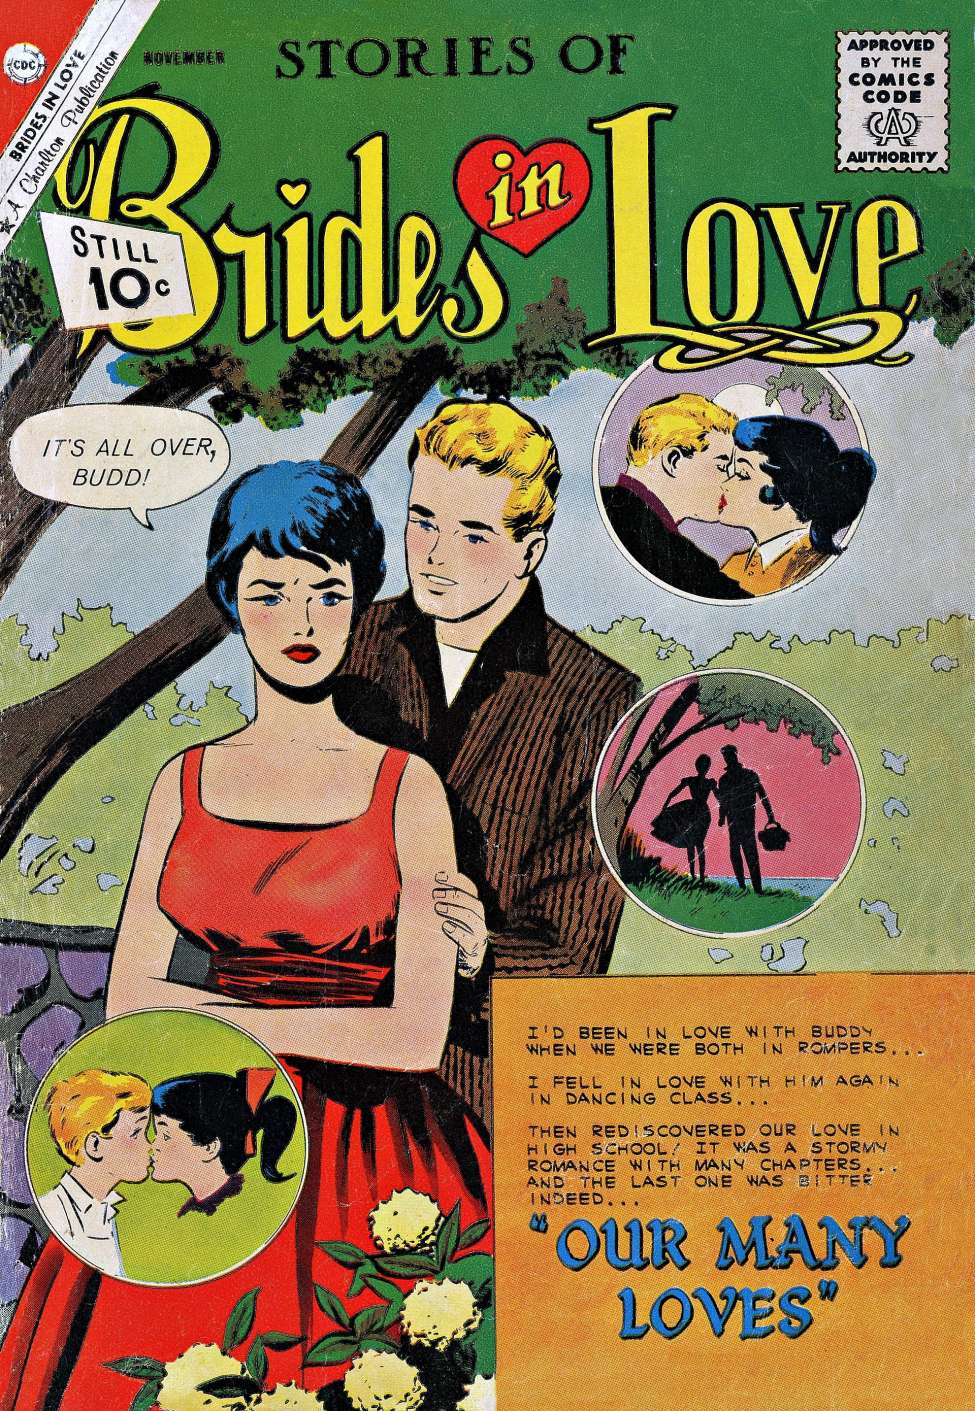 Book Cover For Brides in Love 27